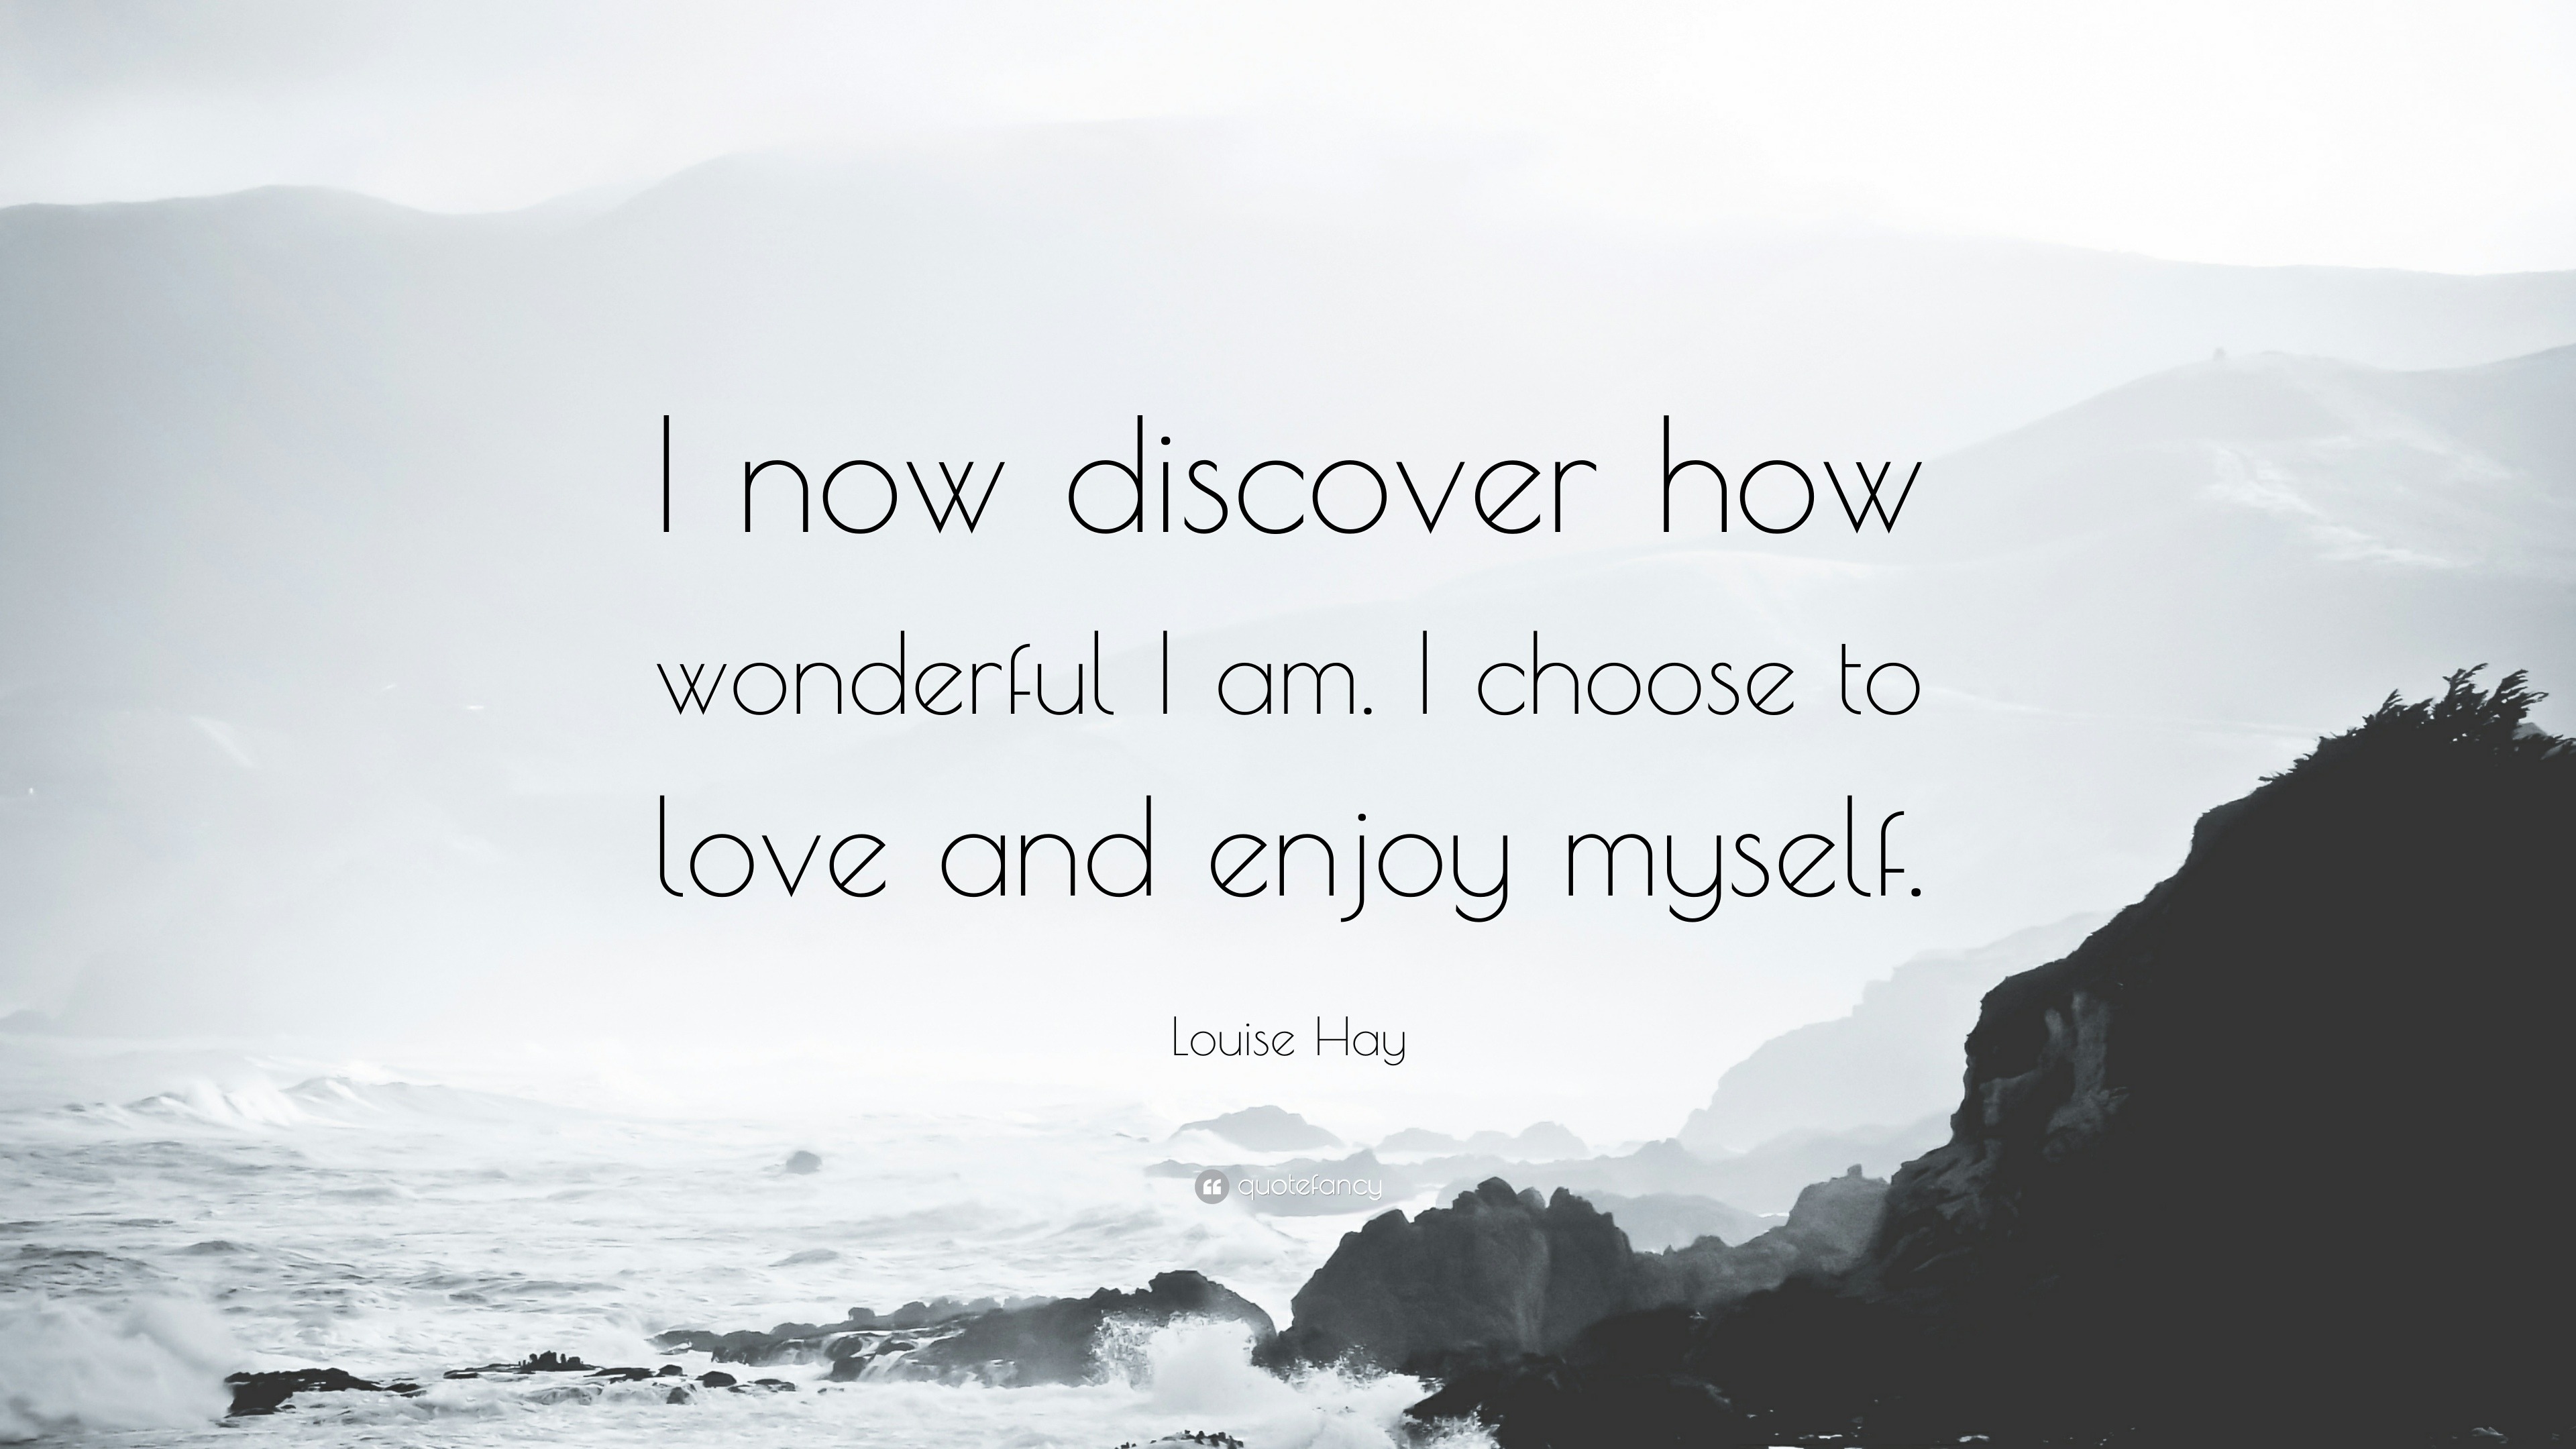 Louise Hay Quote “I now discover how wonderful I am I choose to